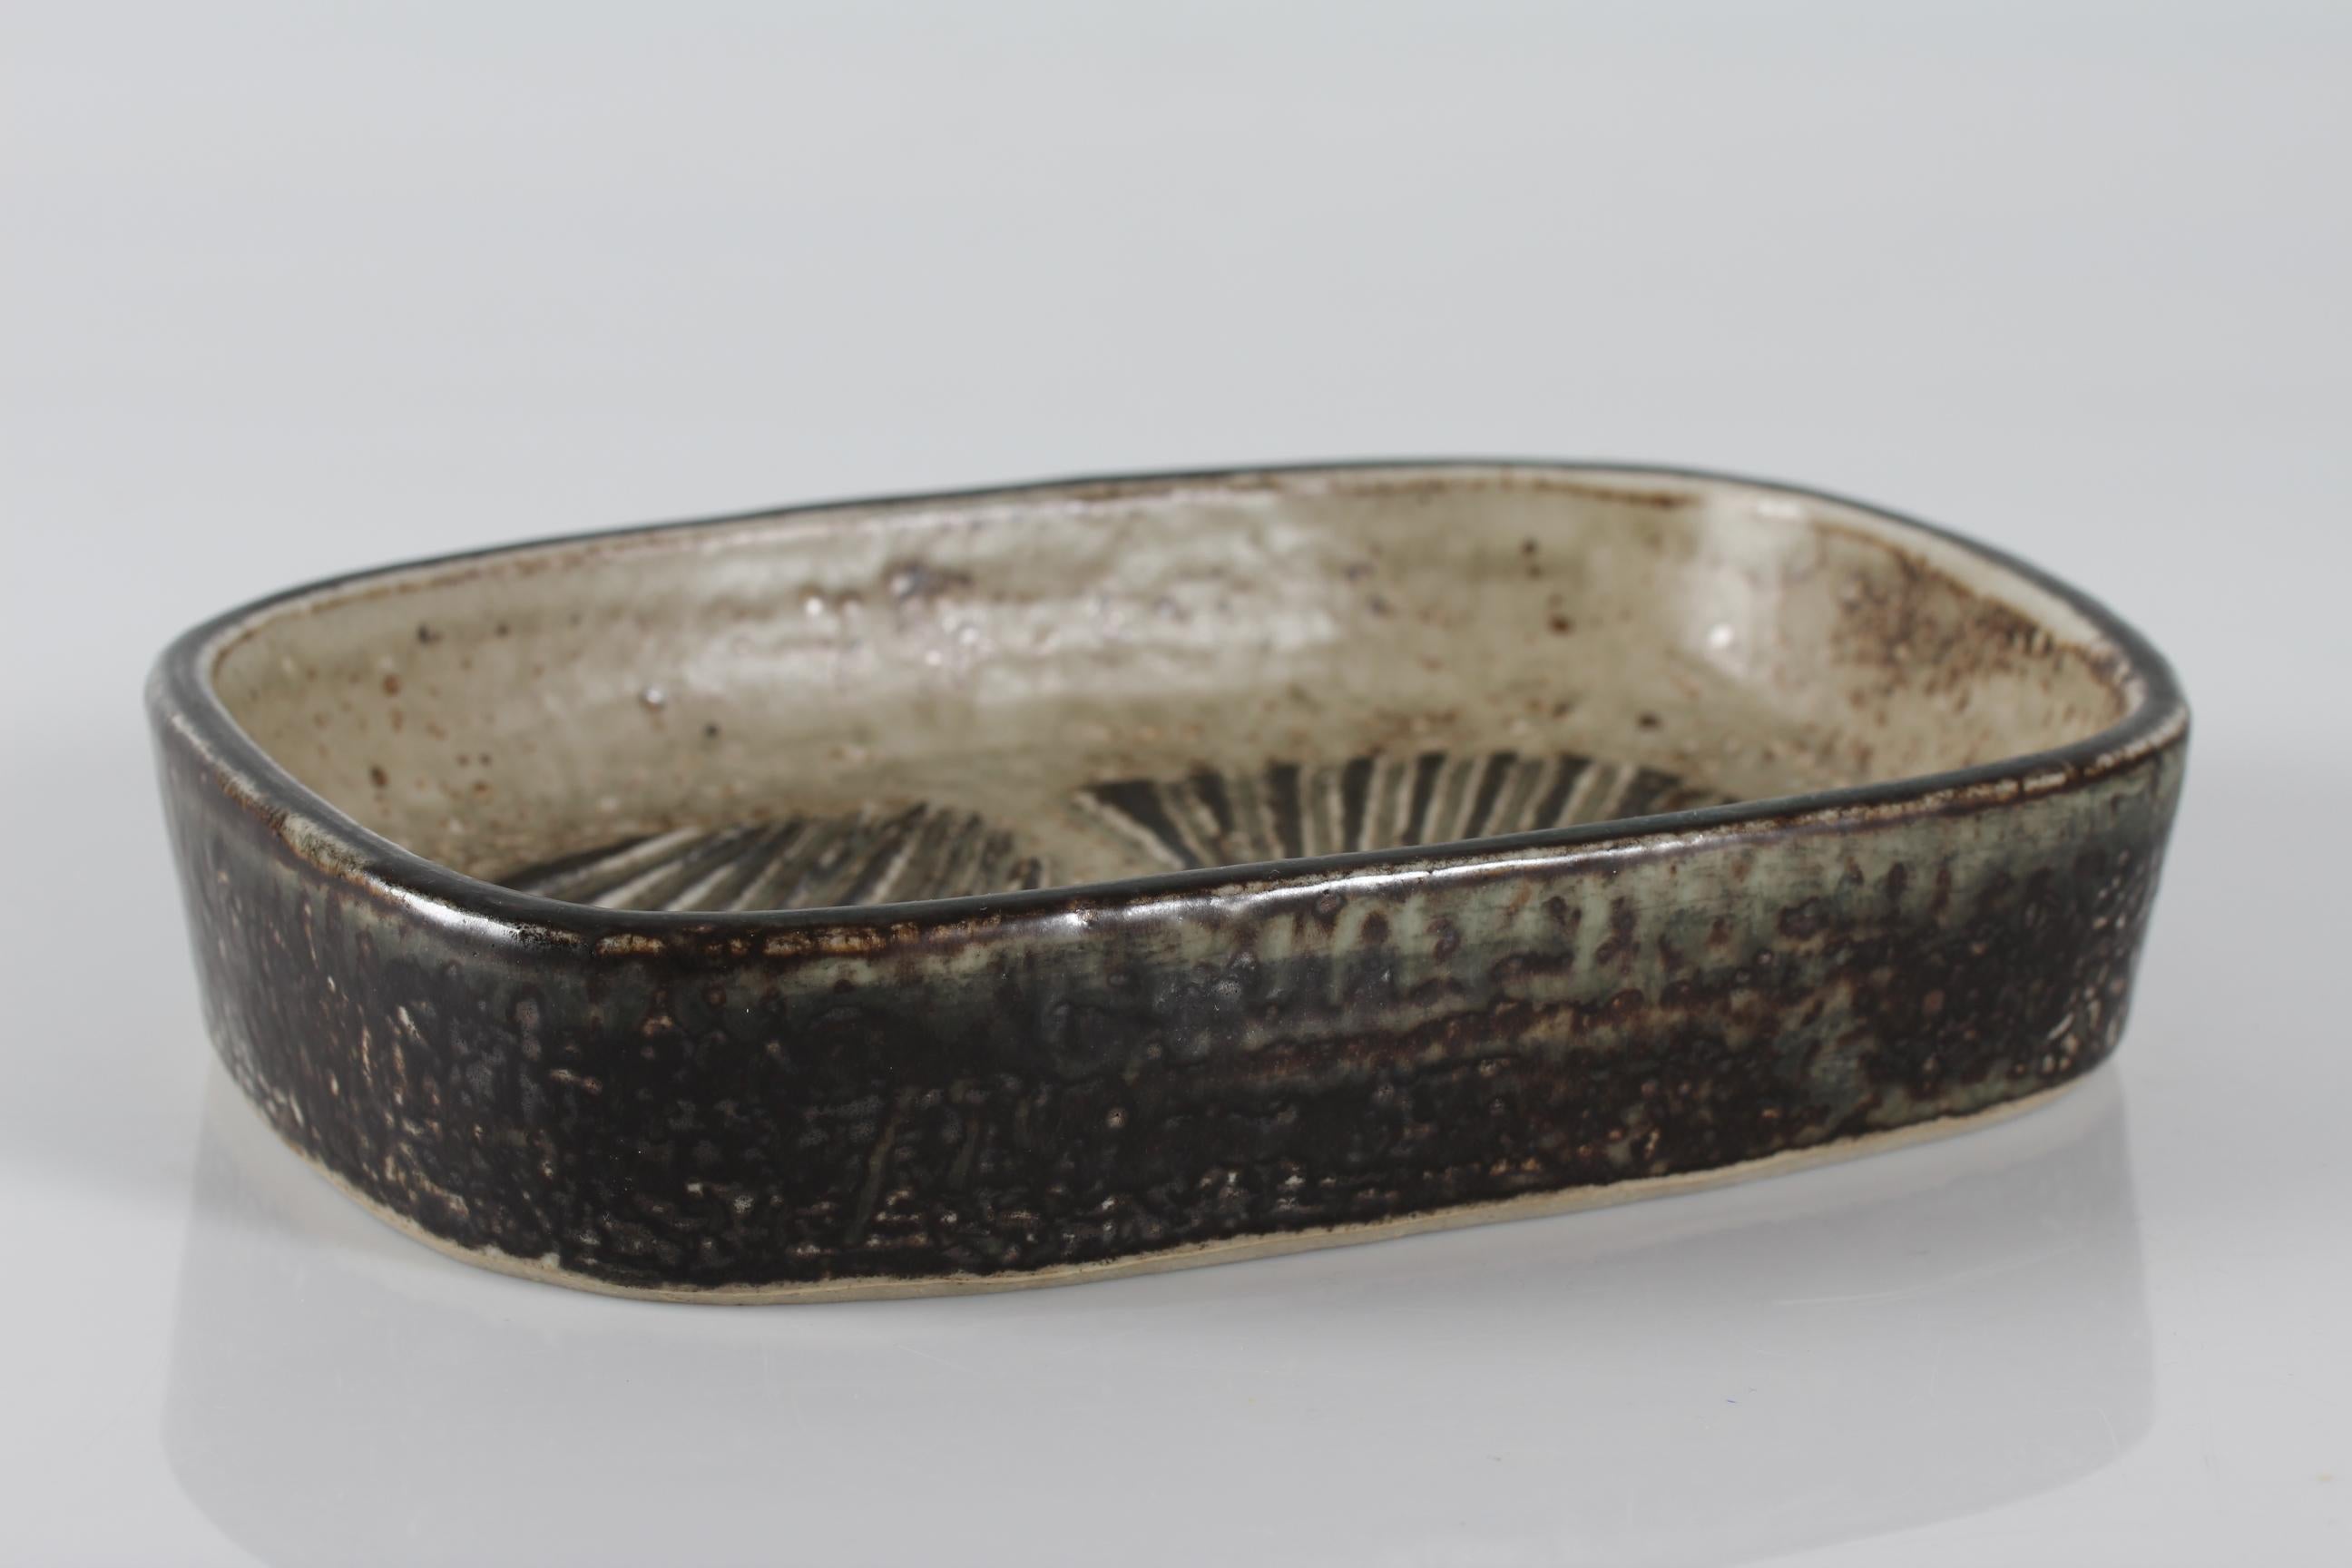 Rectangular stoneware dish model no. 22361 designed by Danish ceramist and artist Eva Stæhr-Nielsen (1911-1976) and manufactured by Royal Copenhagen

The dish is decorated with sung glaze and has the signature E. St. N. for Eva Stæhr Nielsen
Sung